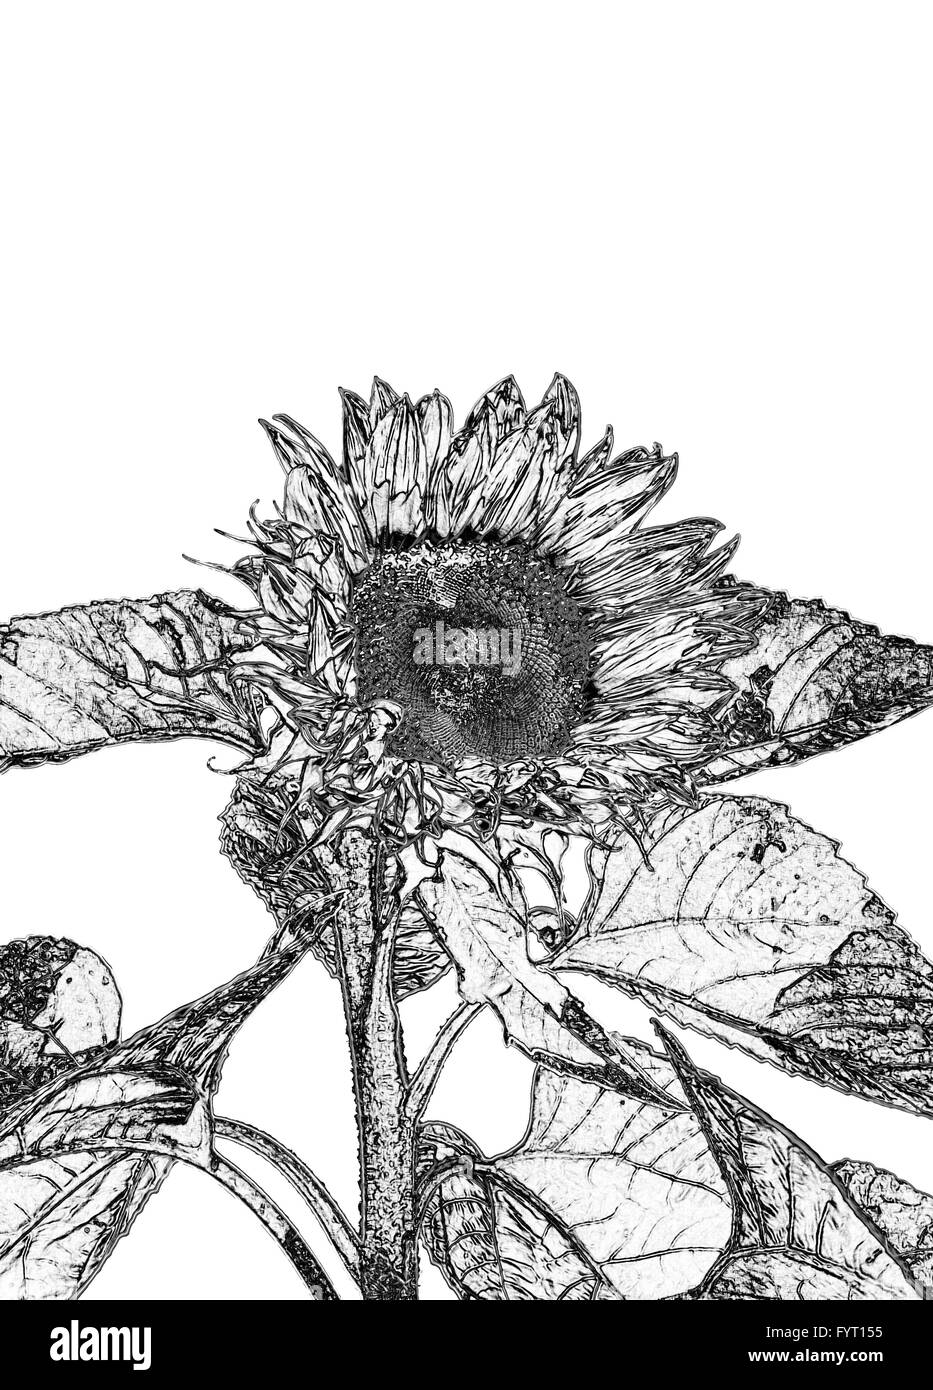 Photo of a sunflower digitally manipulated to look like a pencil sketch on white background see also FYCC4 Stock Photo